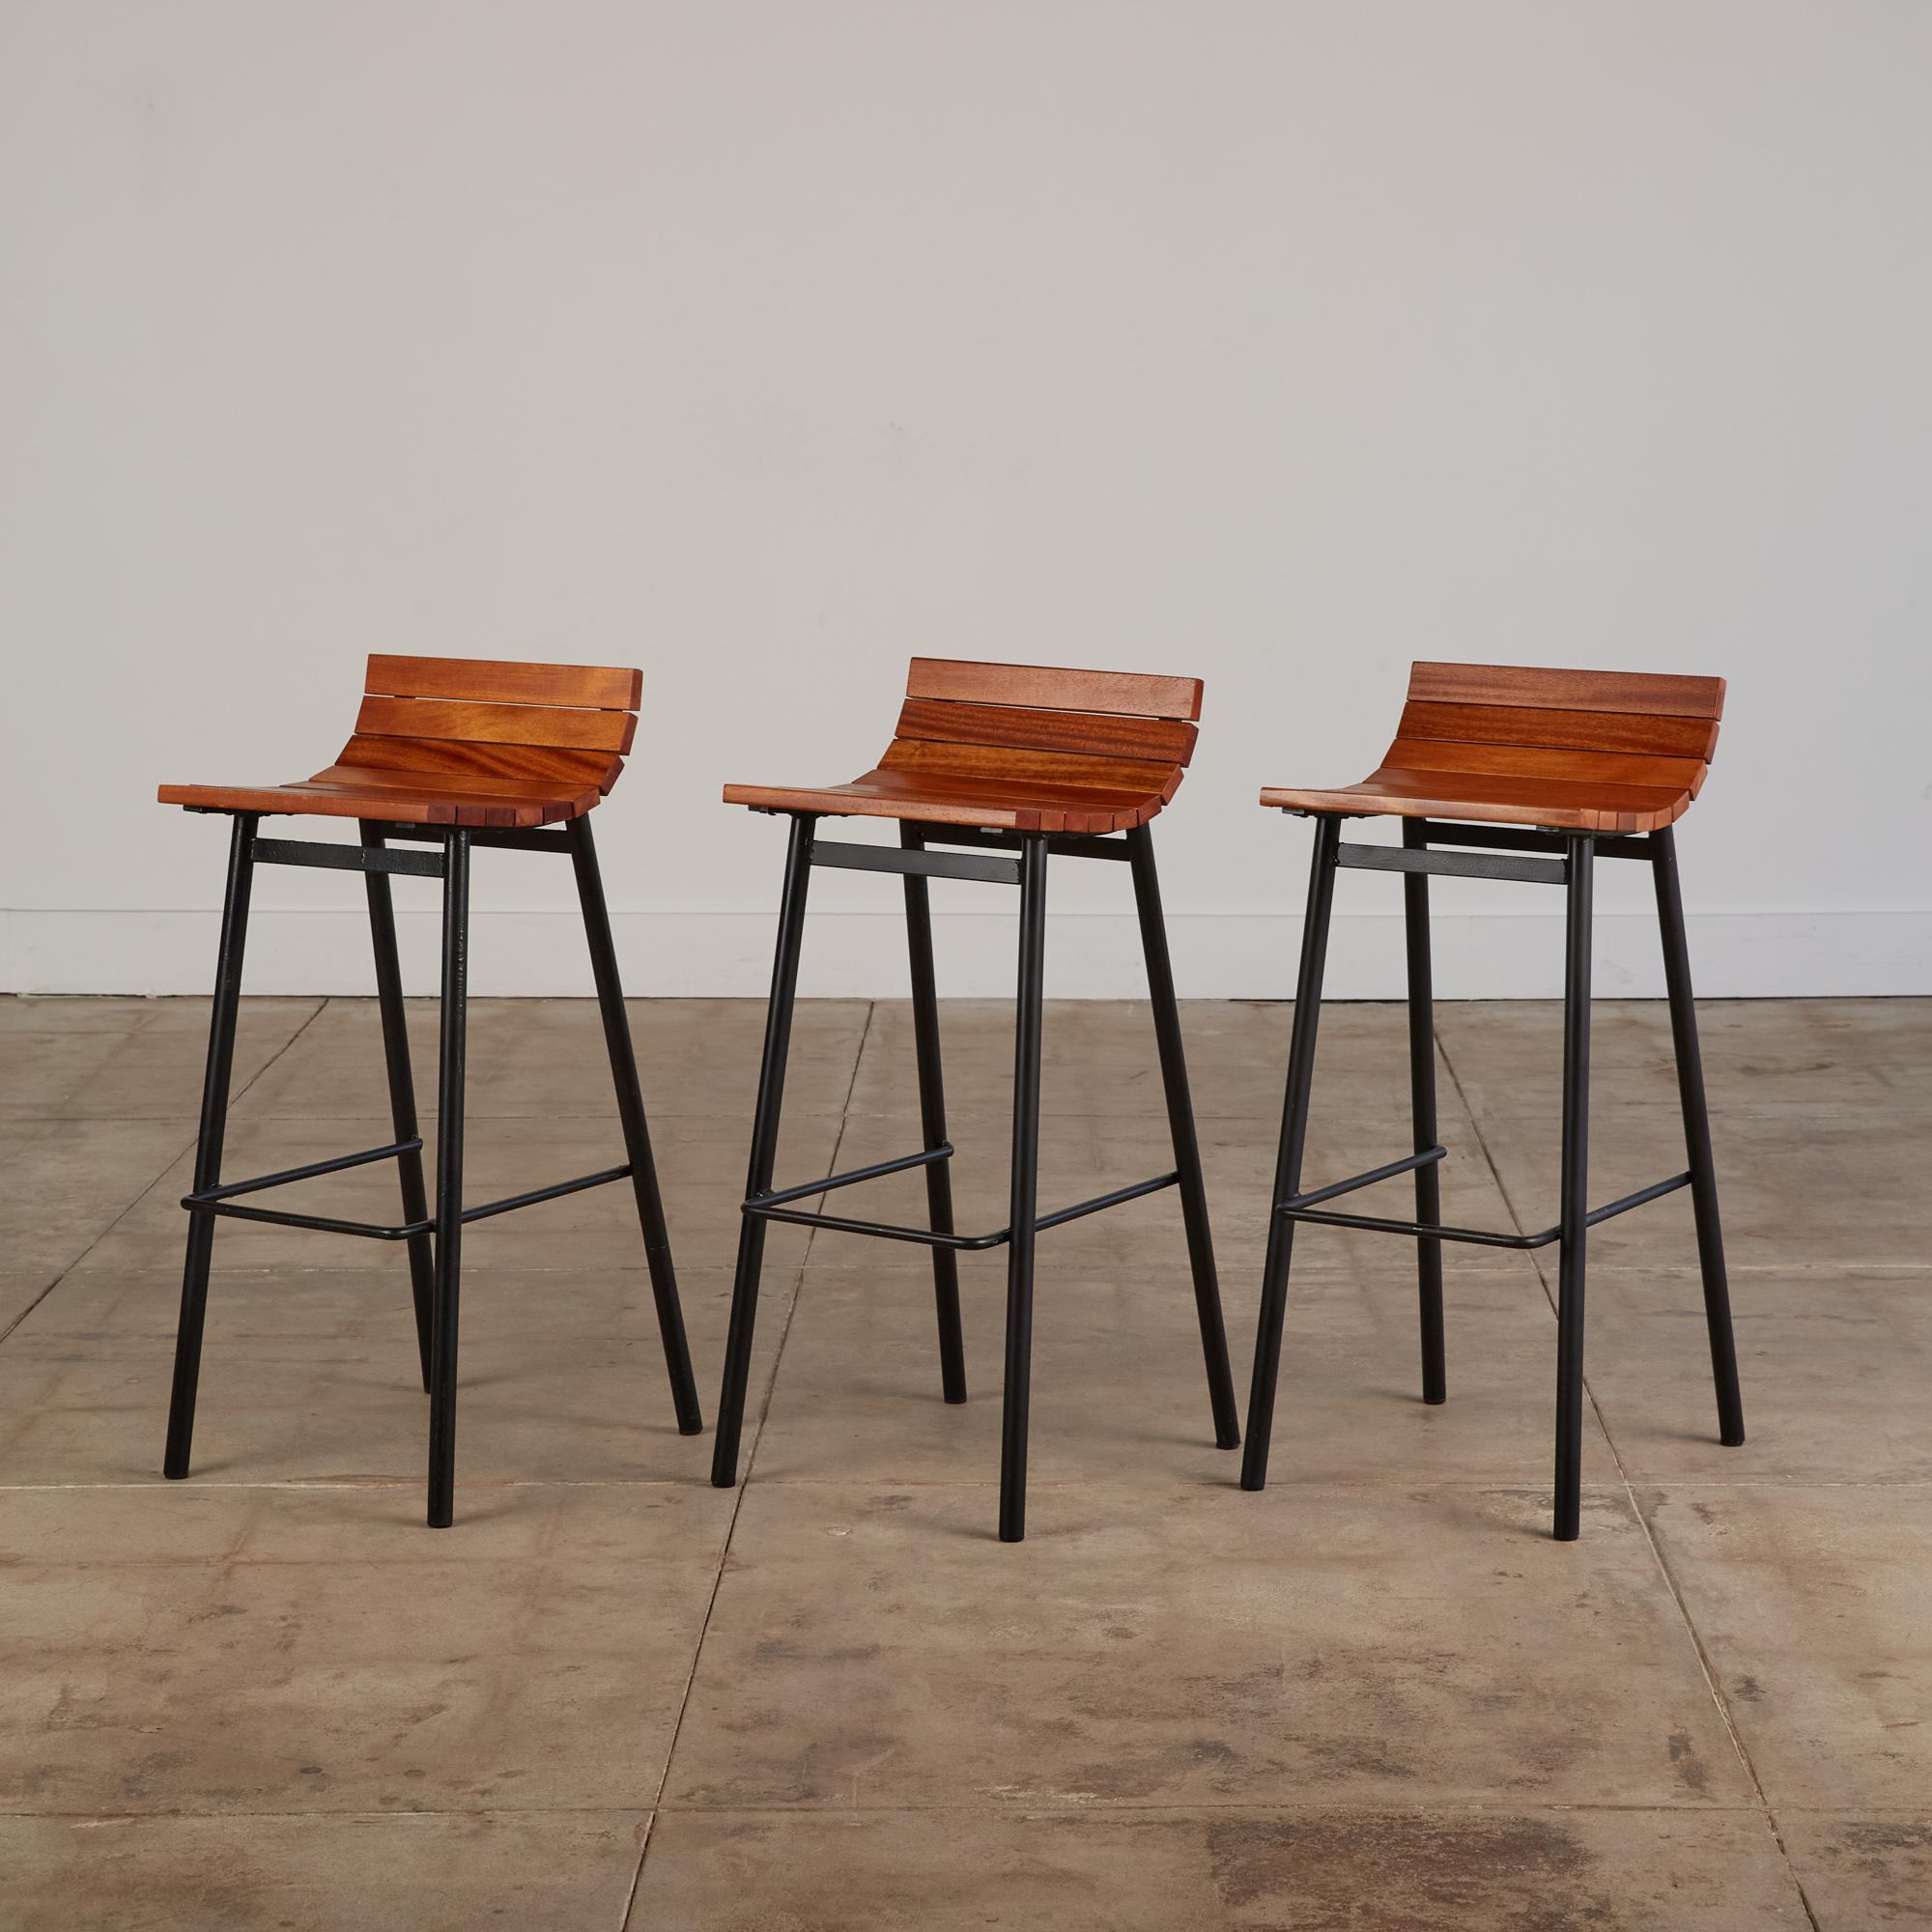 Bar stools by Vista of California, c.1950s. These bar height stools feature newly powder coated tubular steel frames with a thinner strip of steel tubing serving as a mid-height structural support as well as a footrest. The stools also feature new